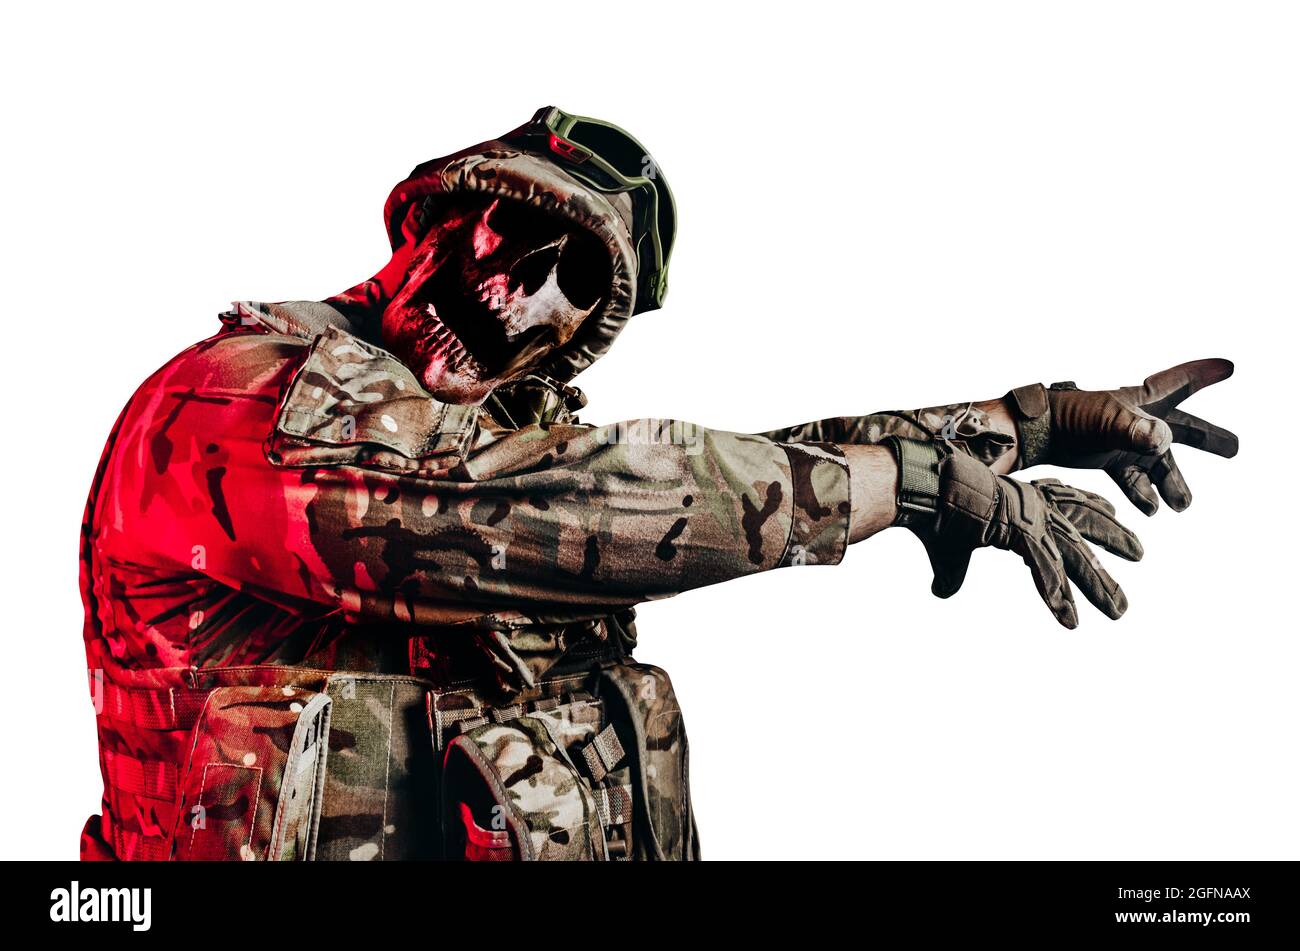 Isolated photo of undead zombie soldier in uniform and armored